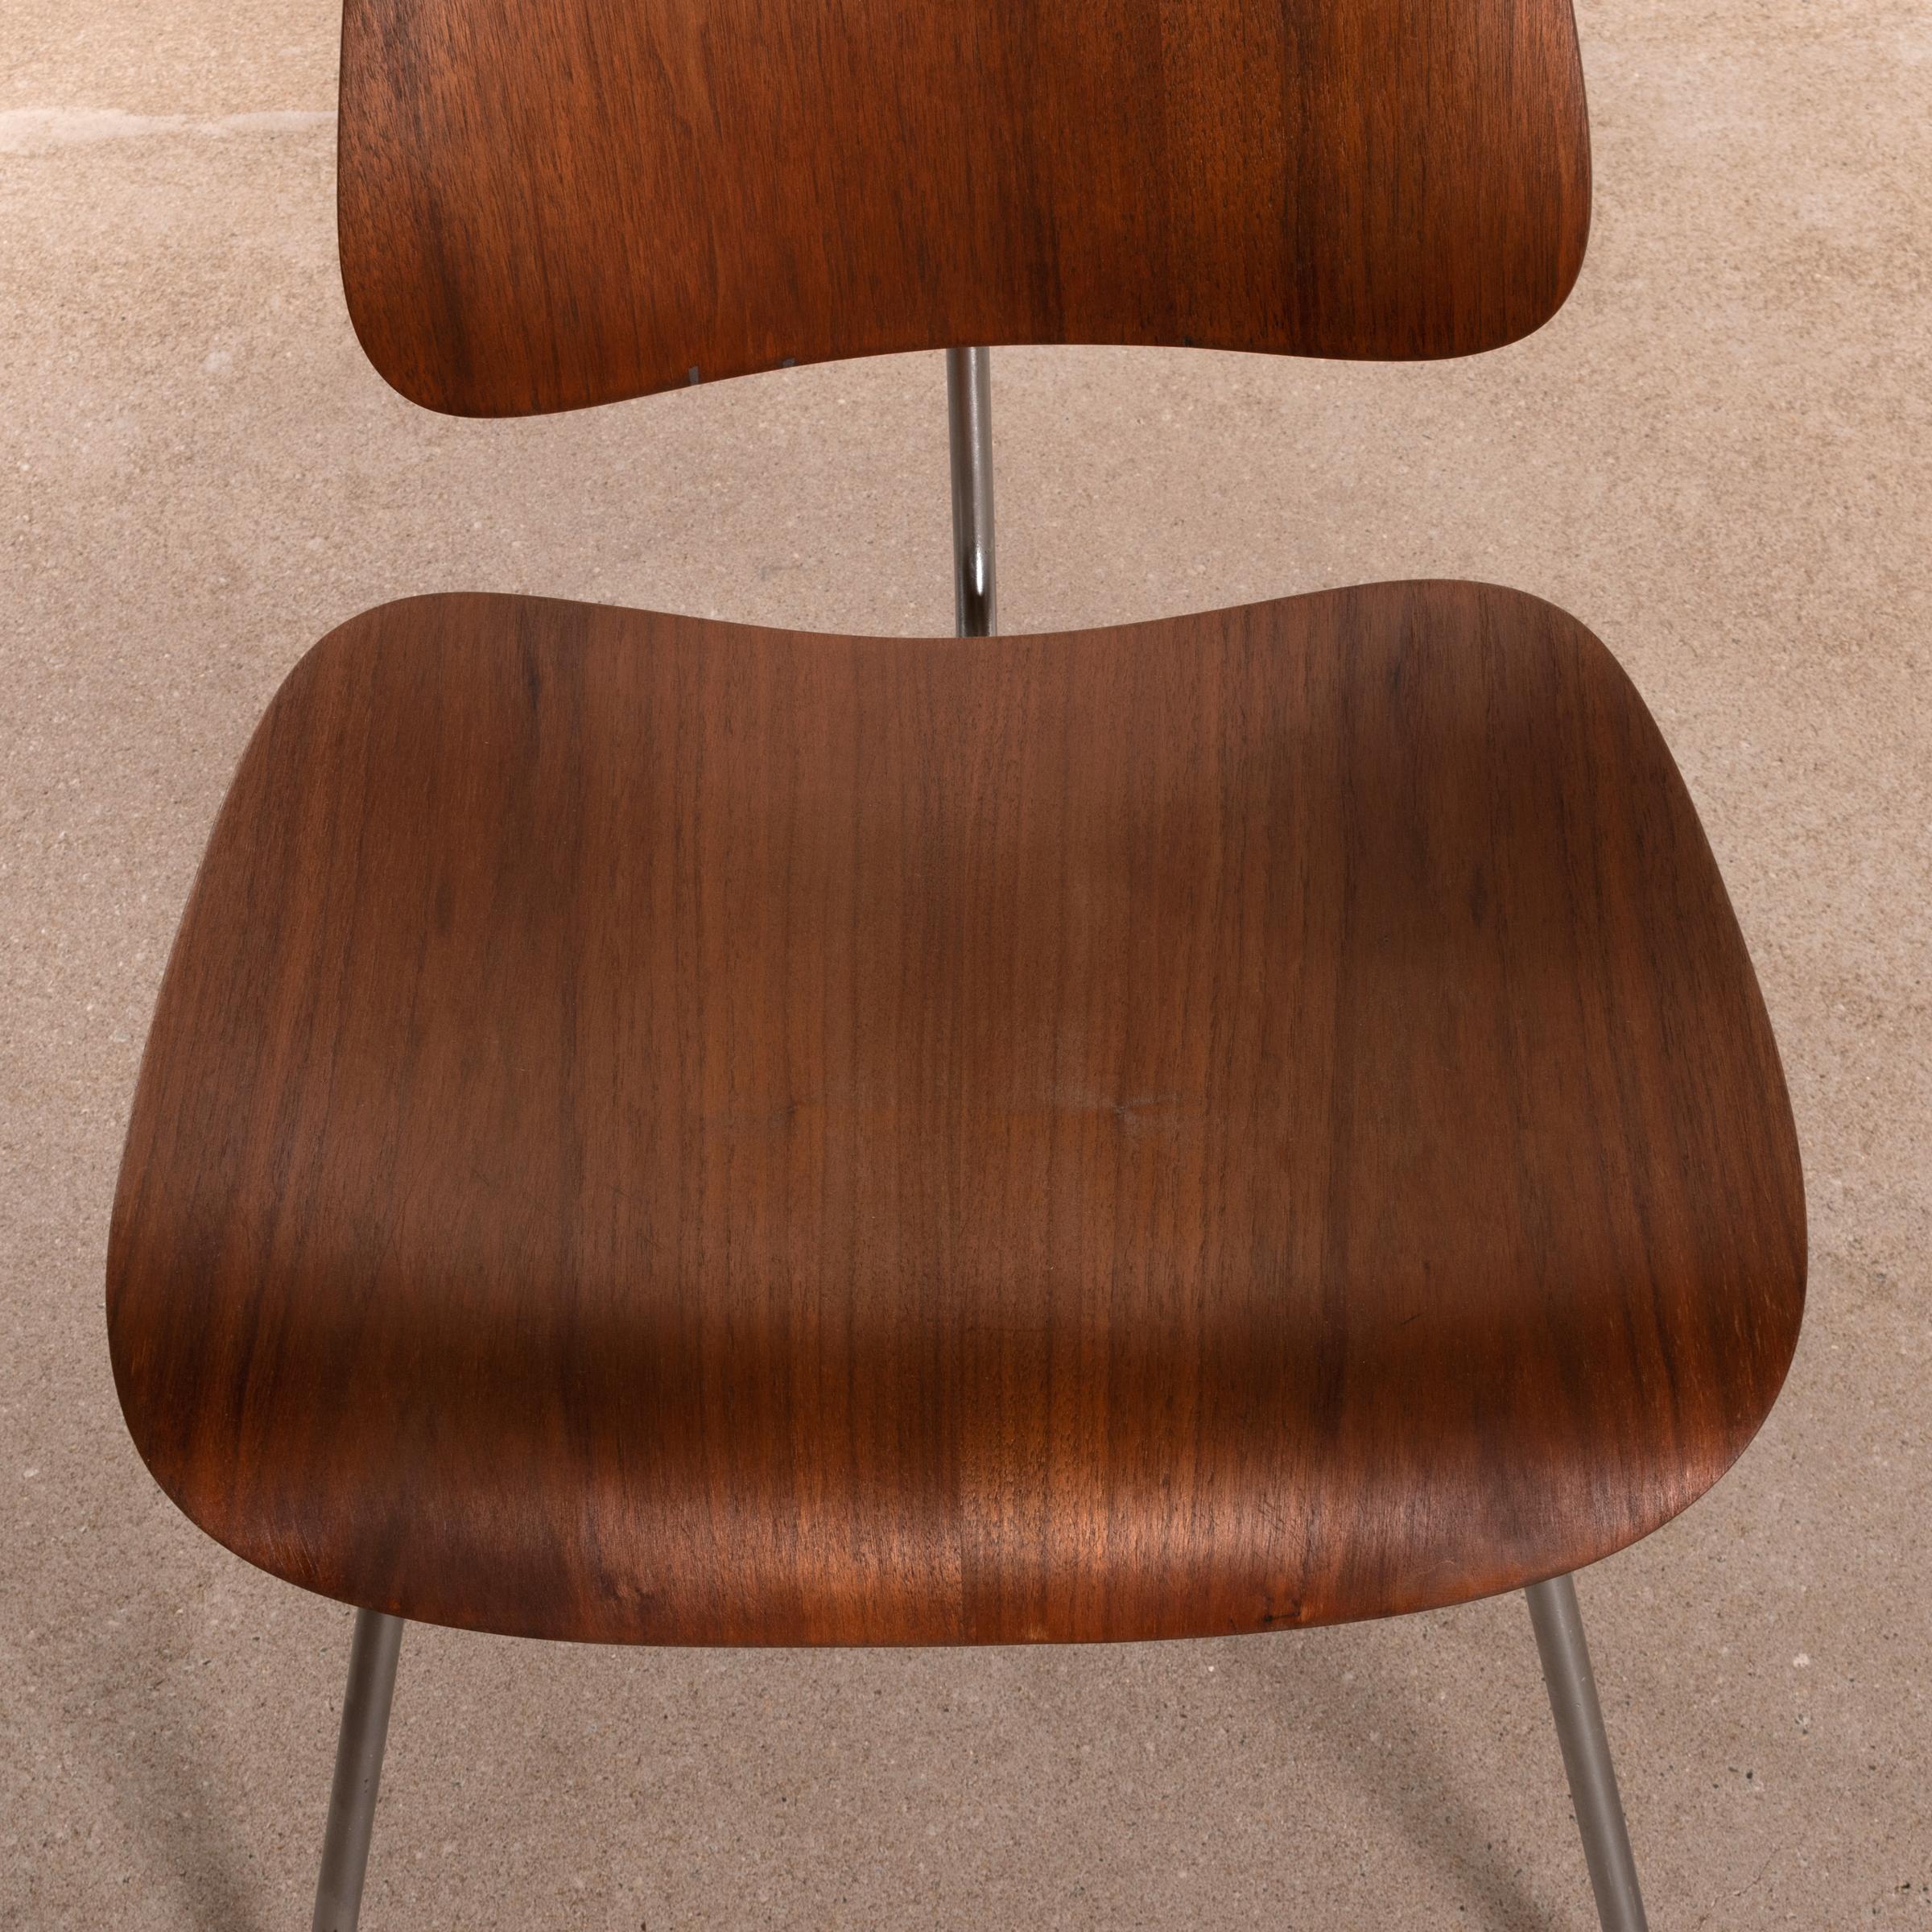 Charles & Ray Eames Early DCM Walnut Side Chair by Herman Miller, USA 1